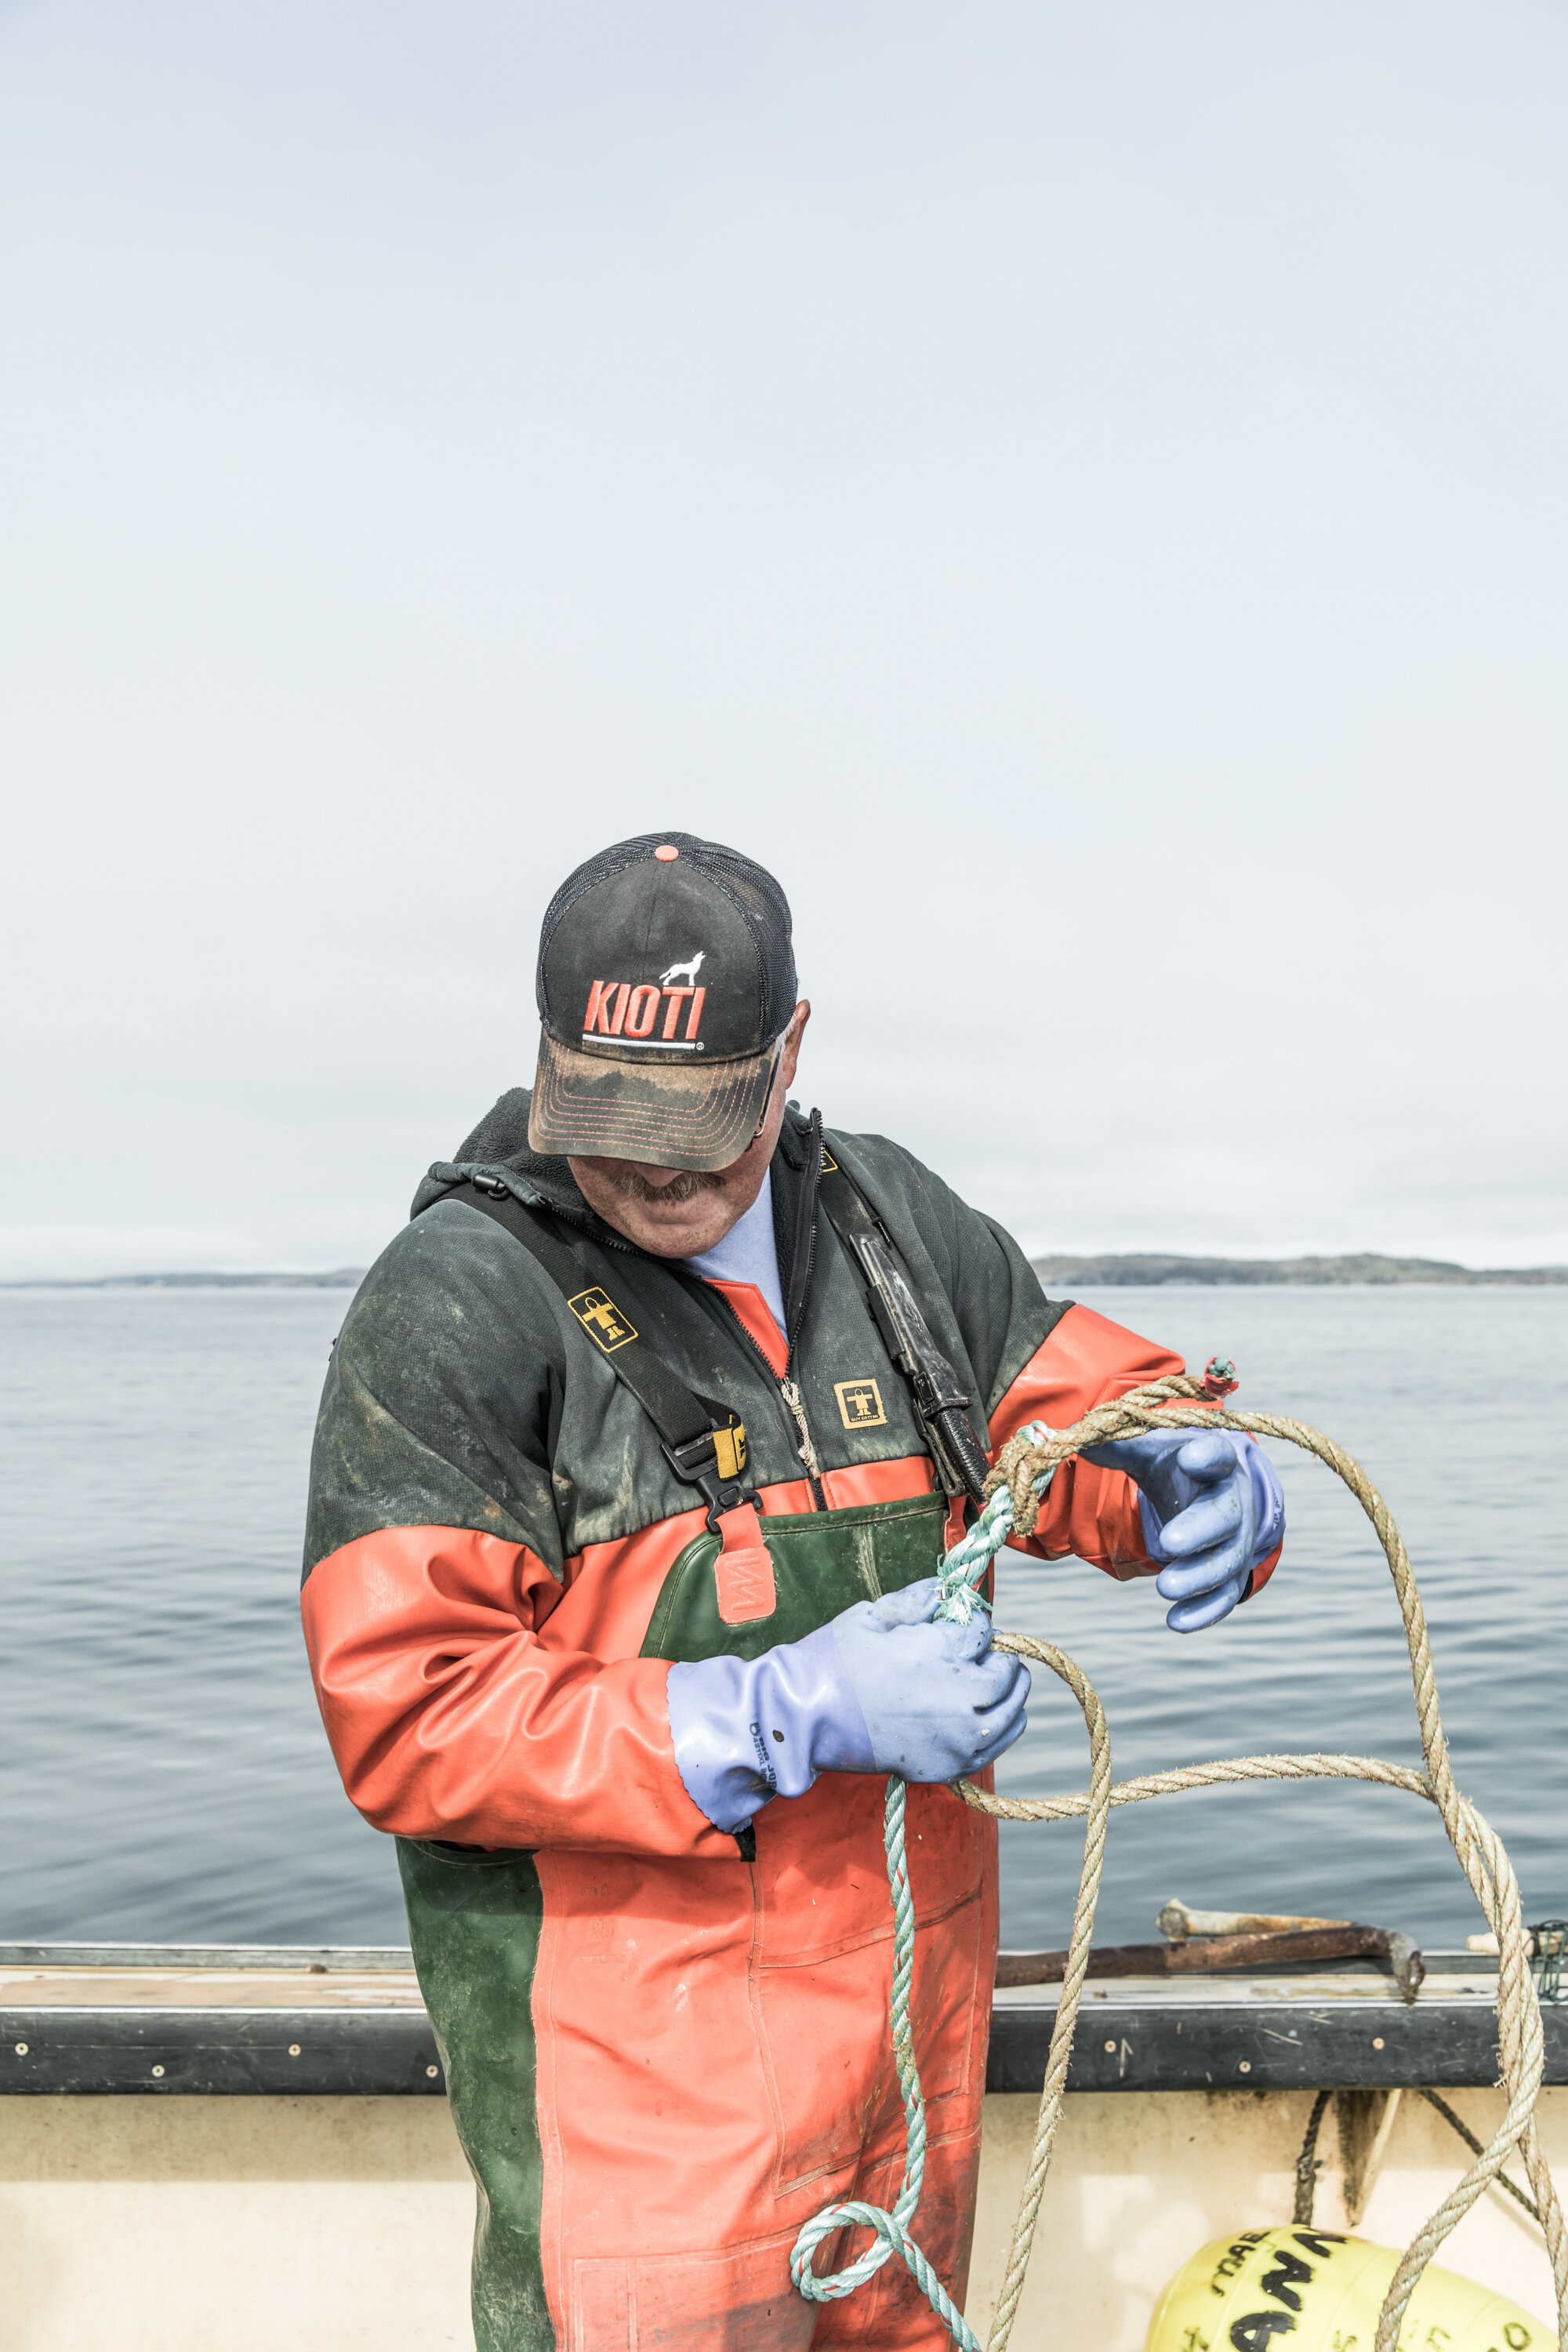   Howie Robbins, Halibut Fishing    “Everyone’s starting to get gear down now. We fish trawls up here. There’s too many Grand Manan-ers fishing in the gray zone now, they got big boats, big gear, it’s hard to handle. You can’t compete, you know? I do